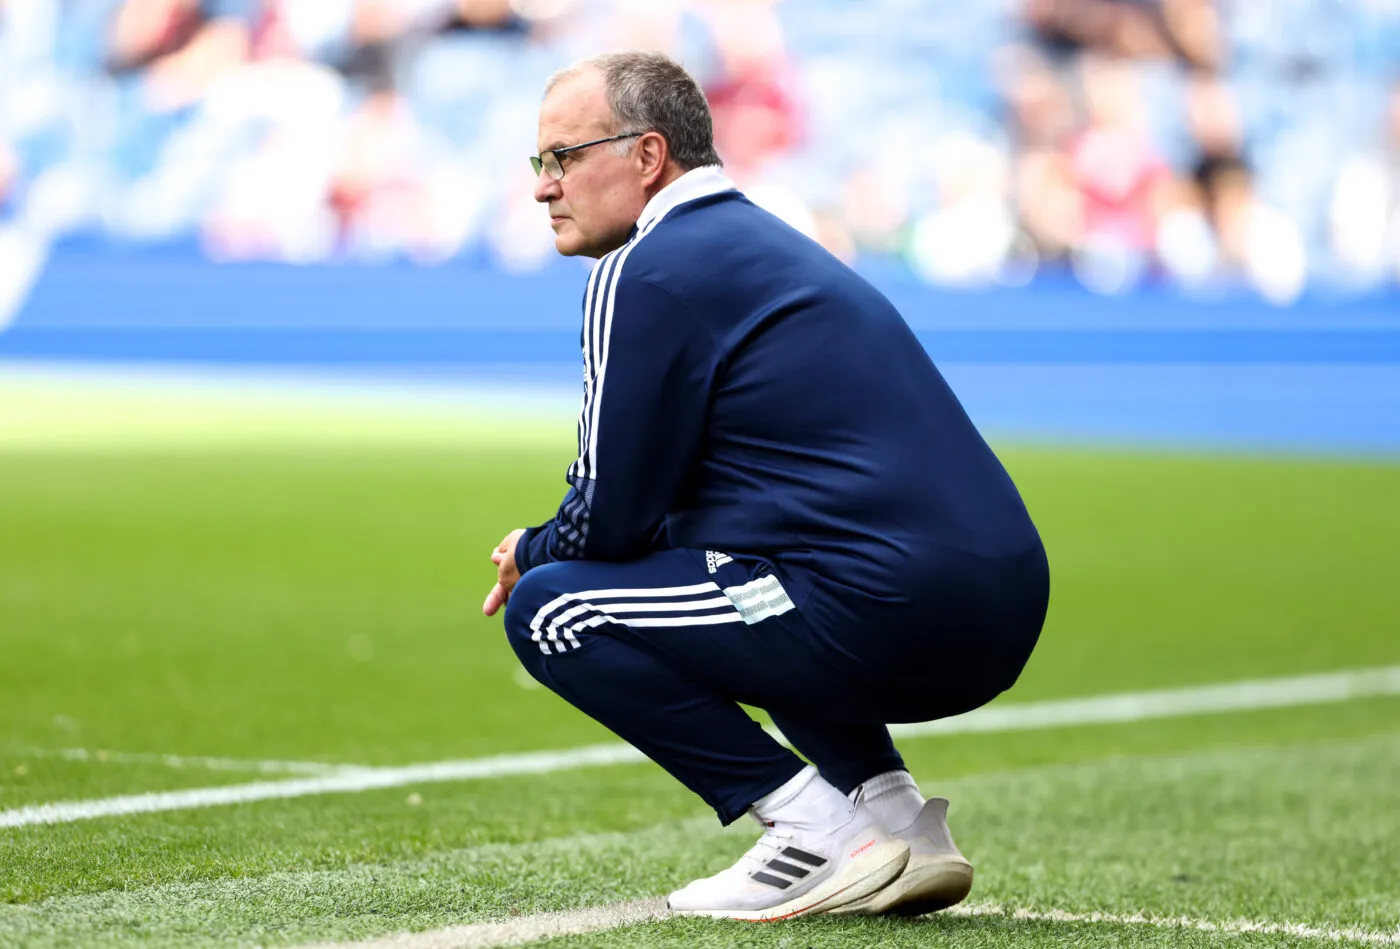 Leeds United manager Marcelo Bielsa on the touchline during the Premier League match at Turf Moor, Burnley. Picture date: Sunday August 29, 2021. 
Photo by Icon Sport